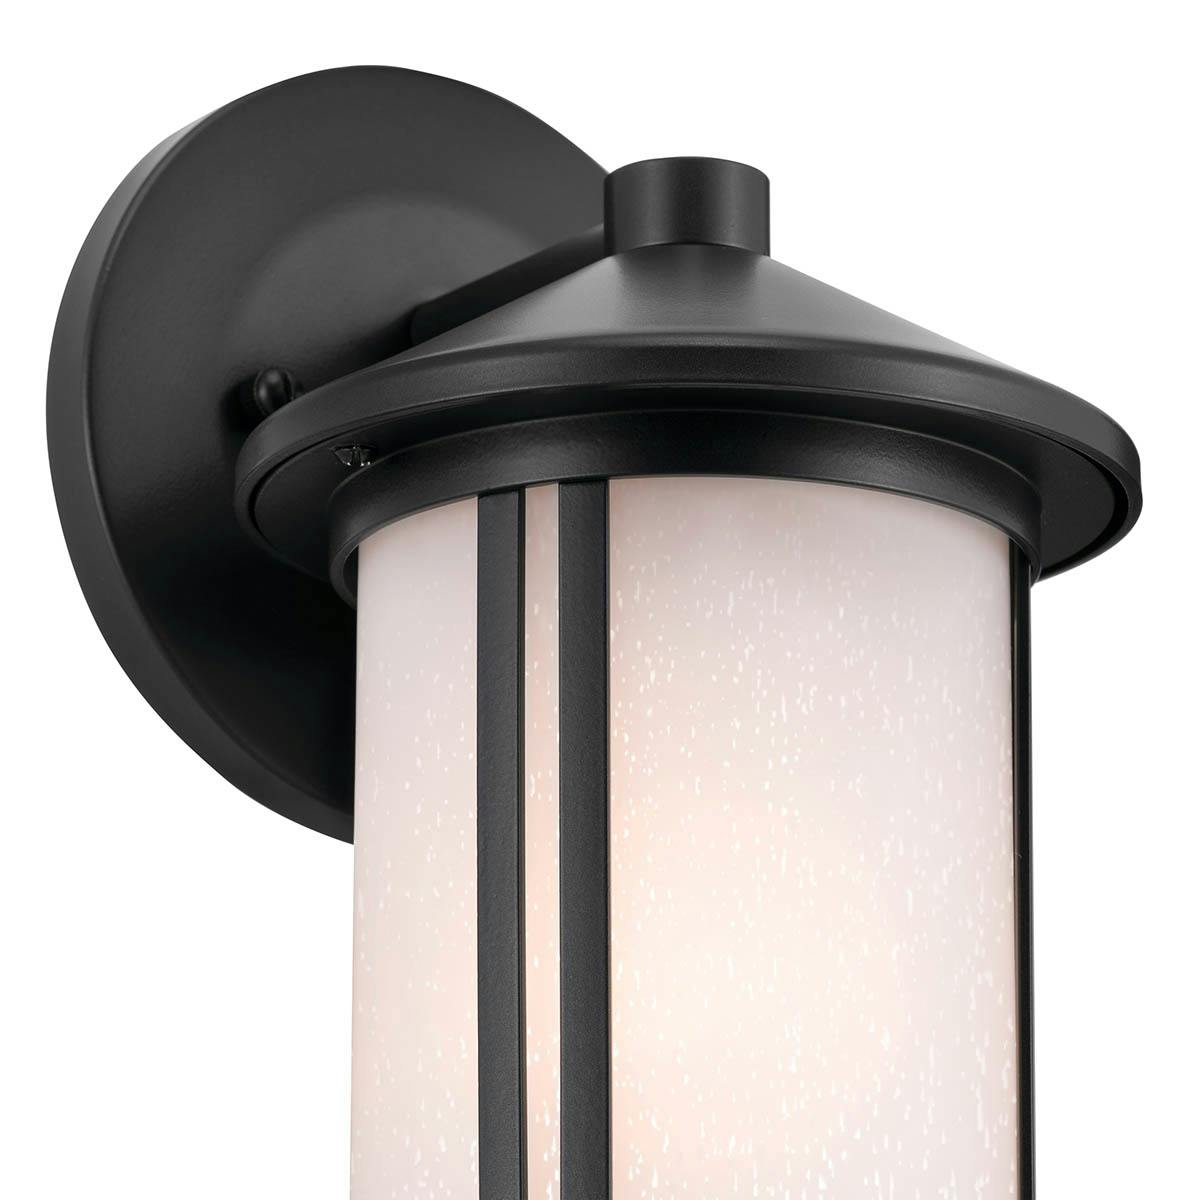 Close up view of the Lombard 10.5" 1 Light Wall Light Black on a white background